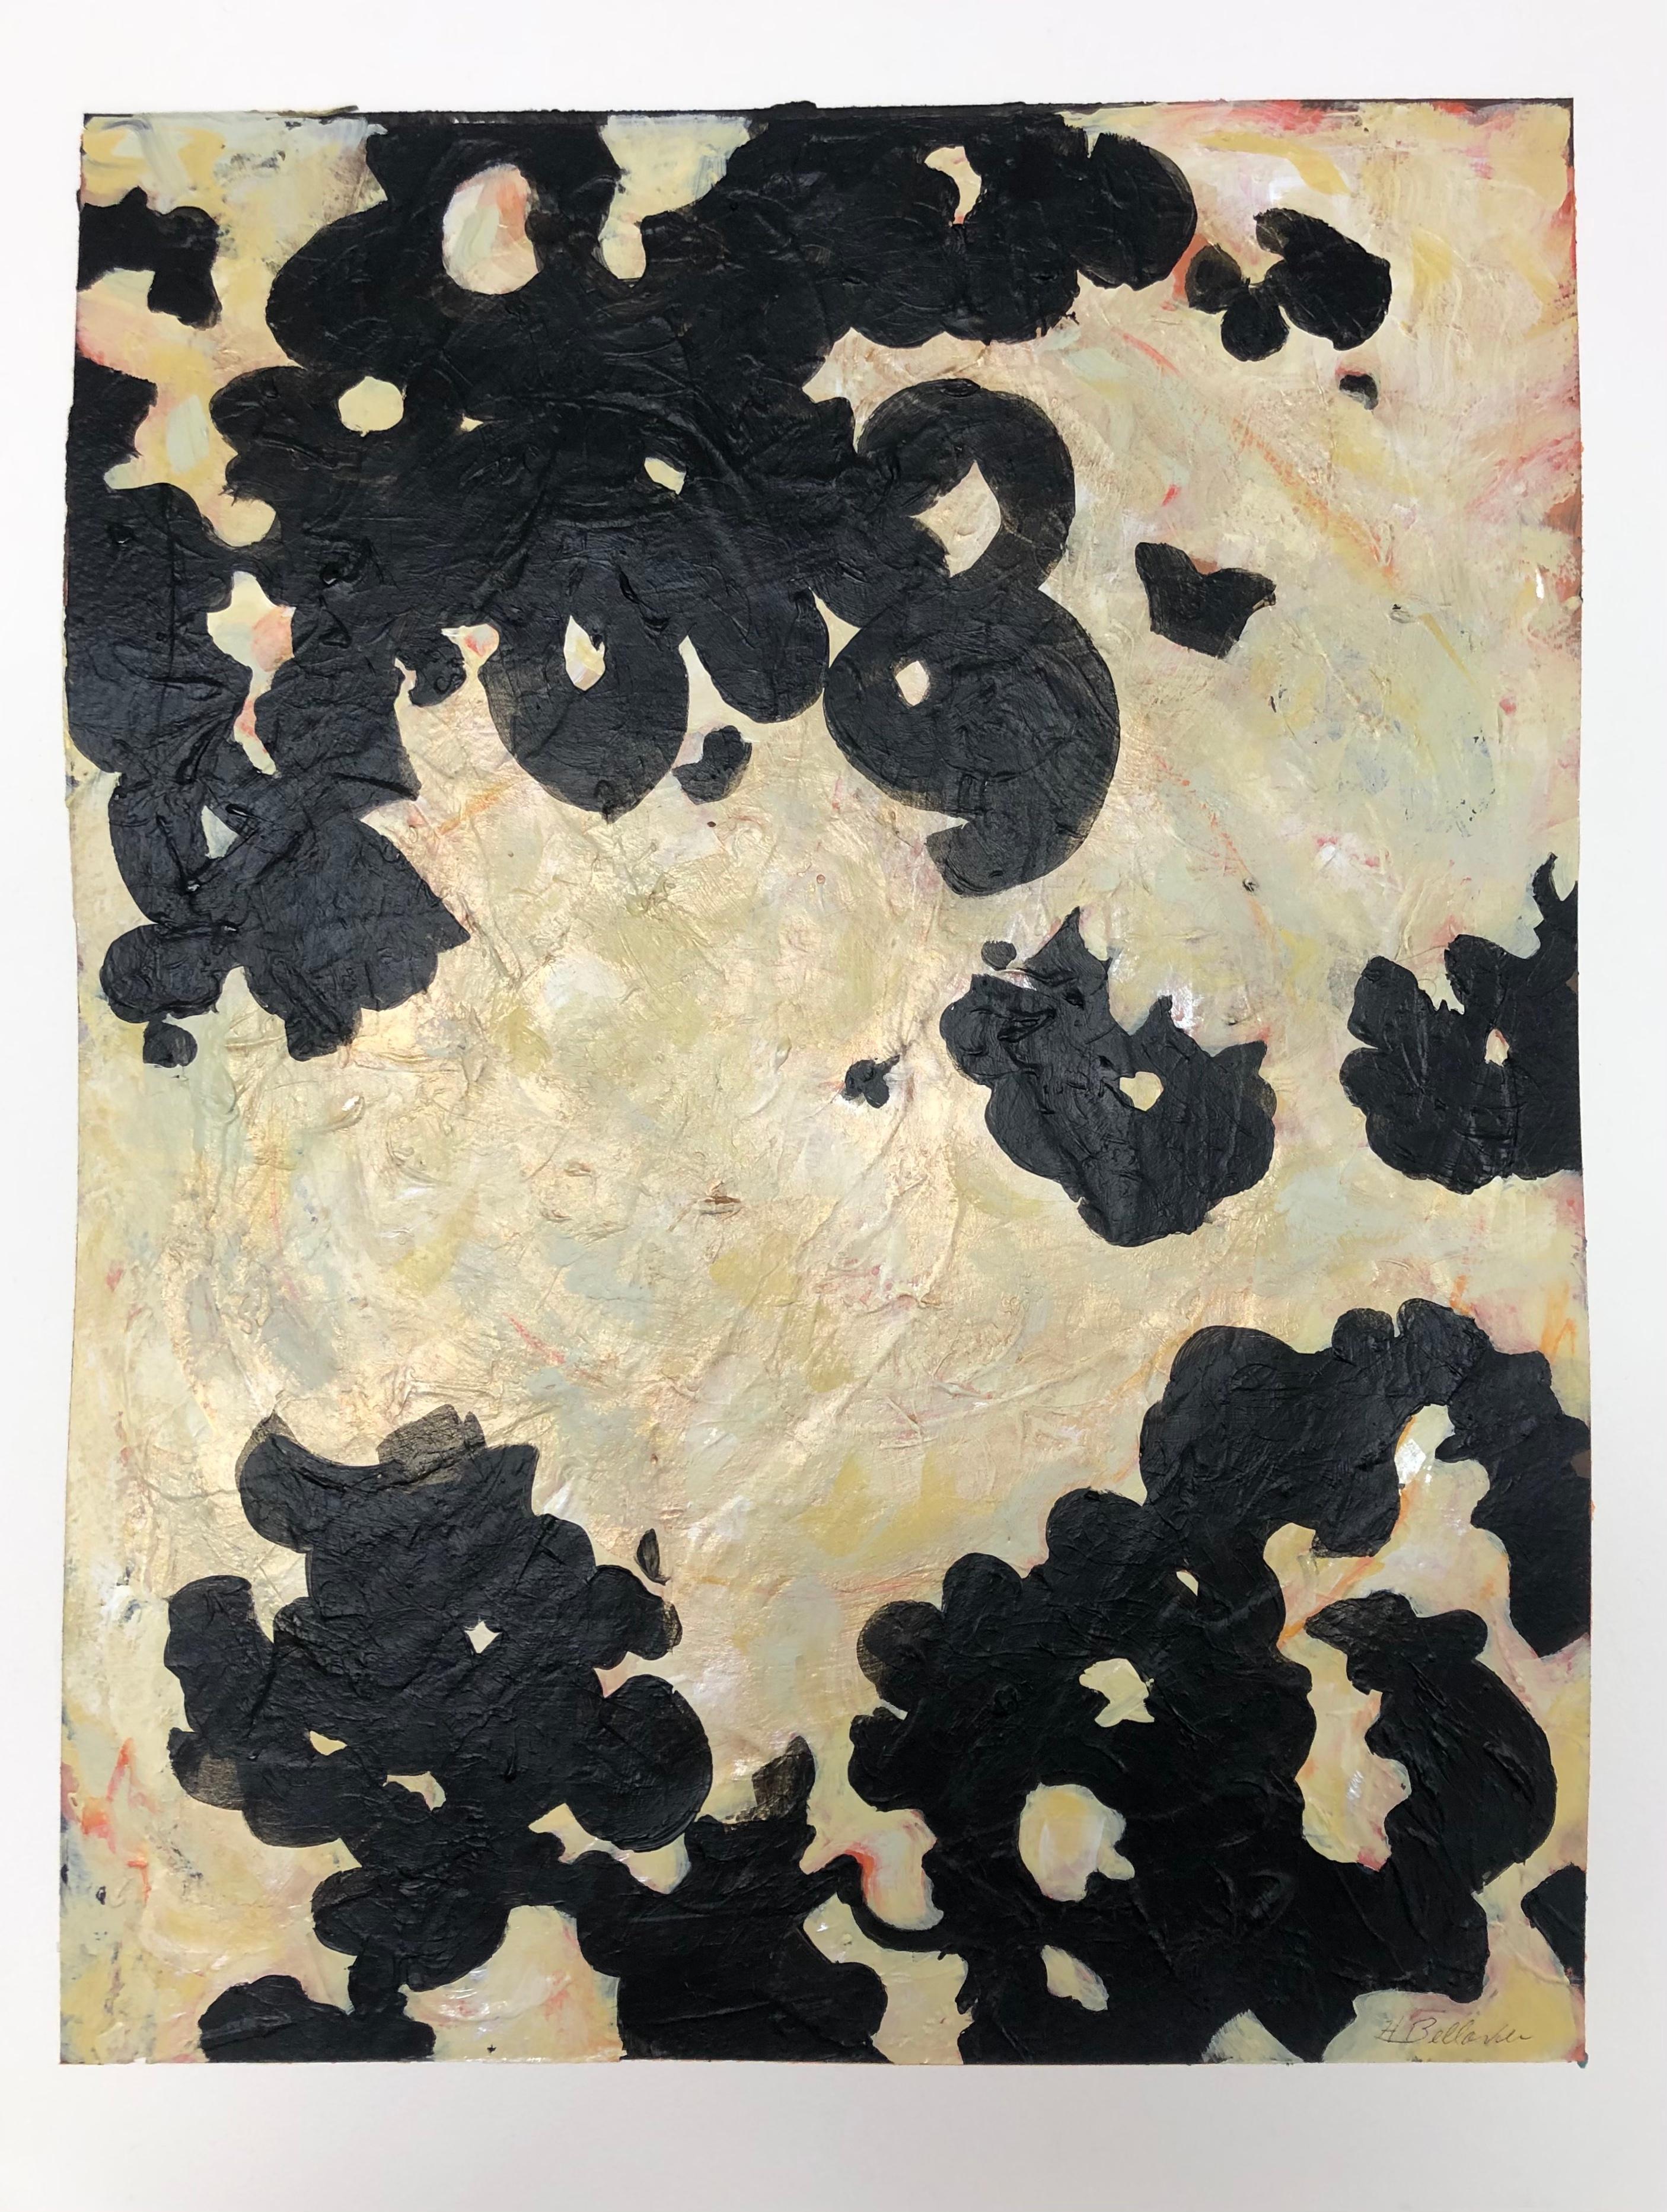 Helen Bellaver Landscape Painting - Abstract 64 - Abstract Expressionist Mixed Media (Black + Yellow + Cream)